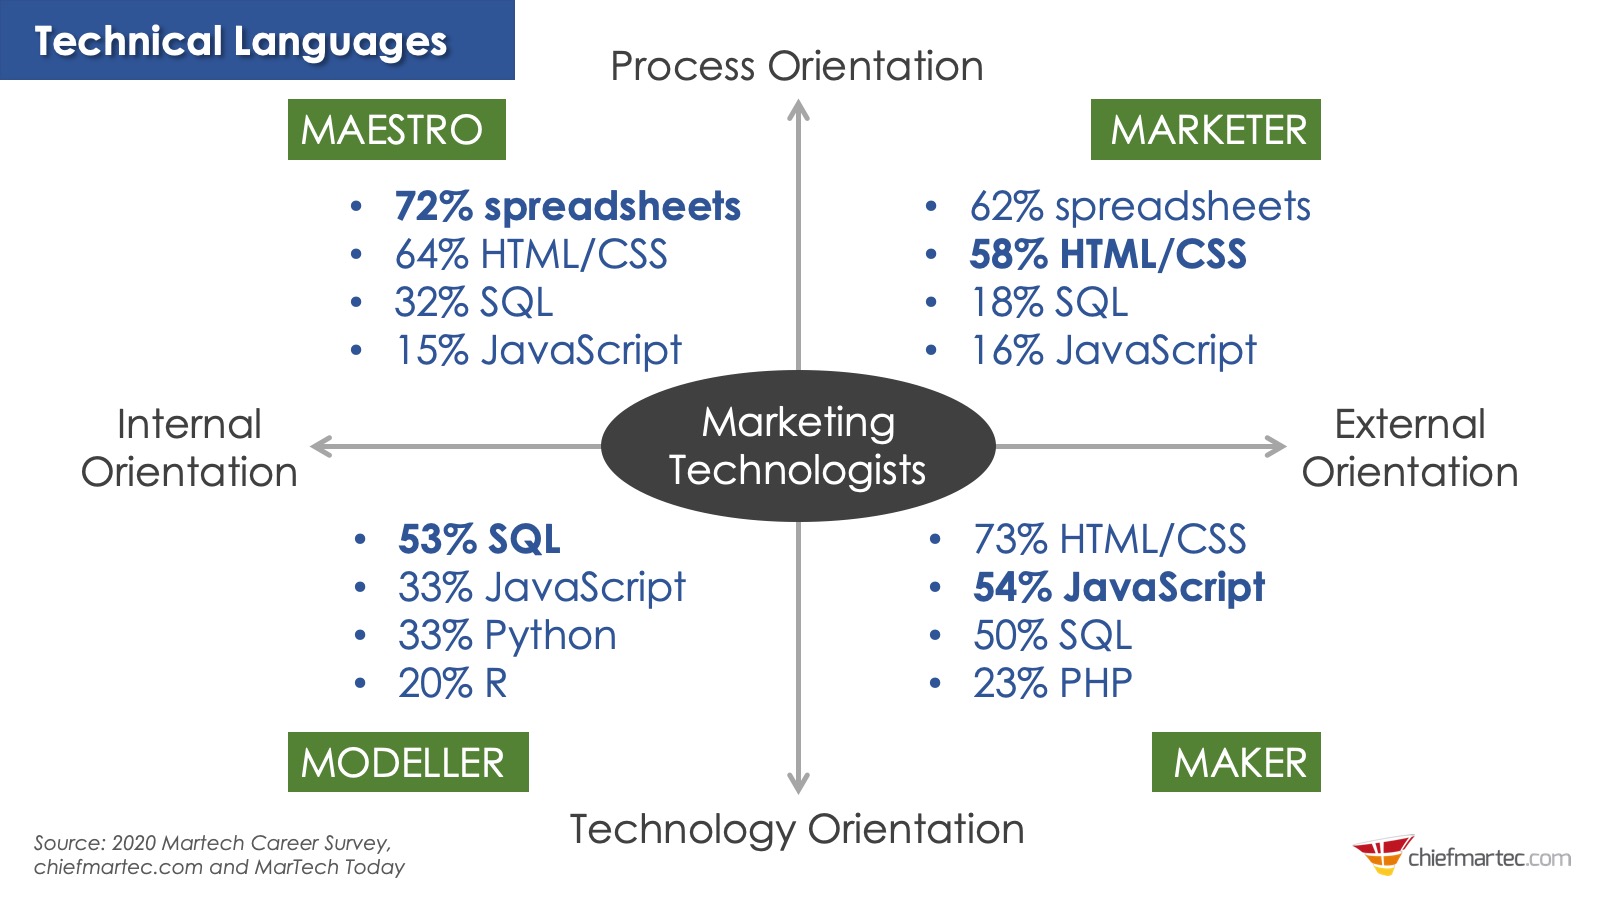 Martech Roles Fluency with Technical Languages